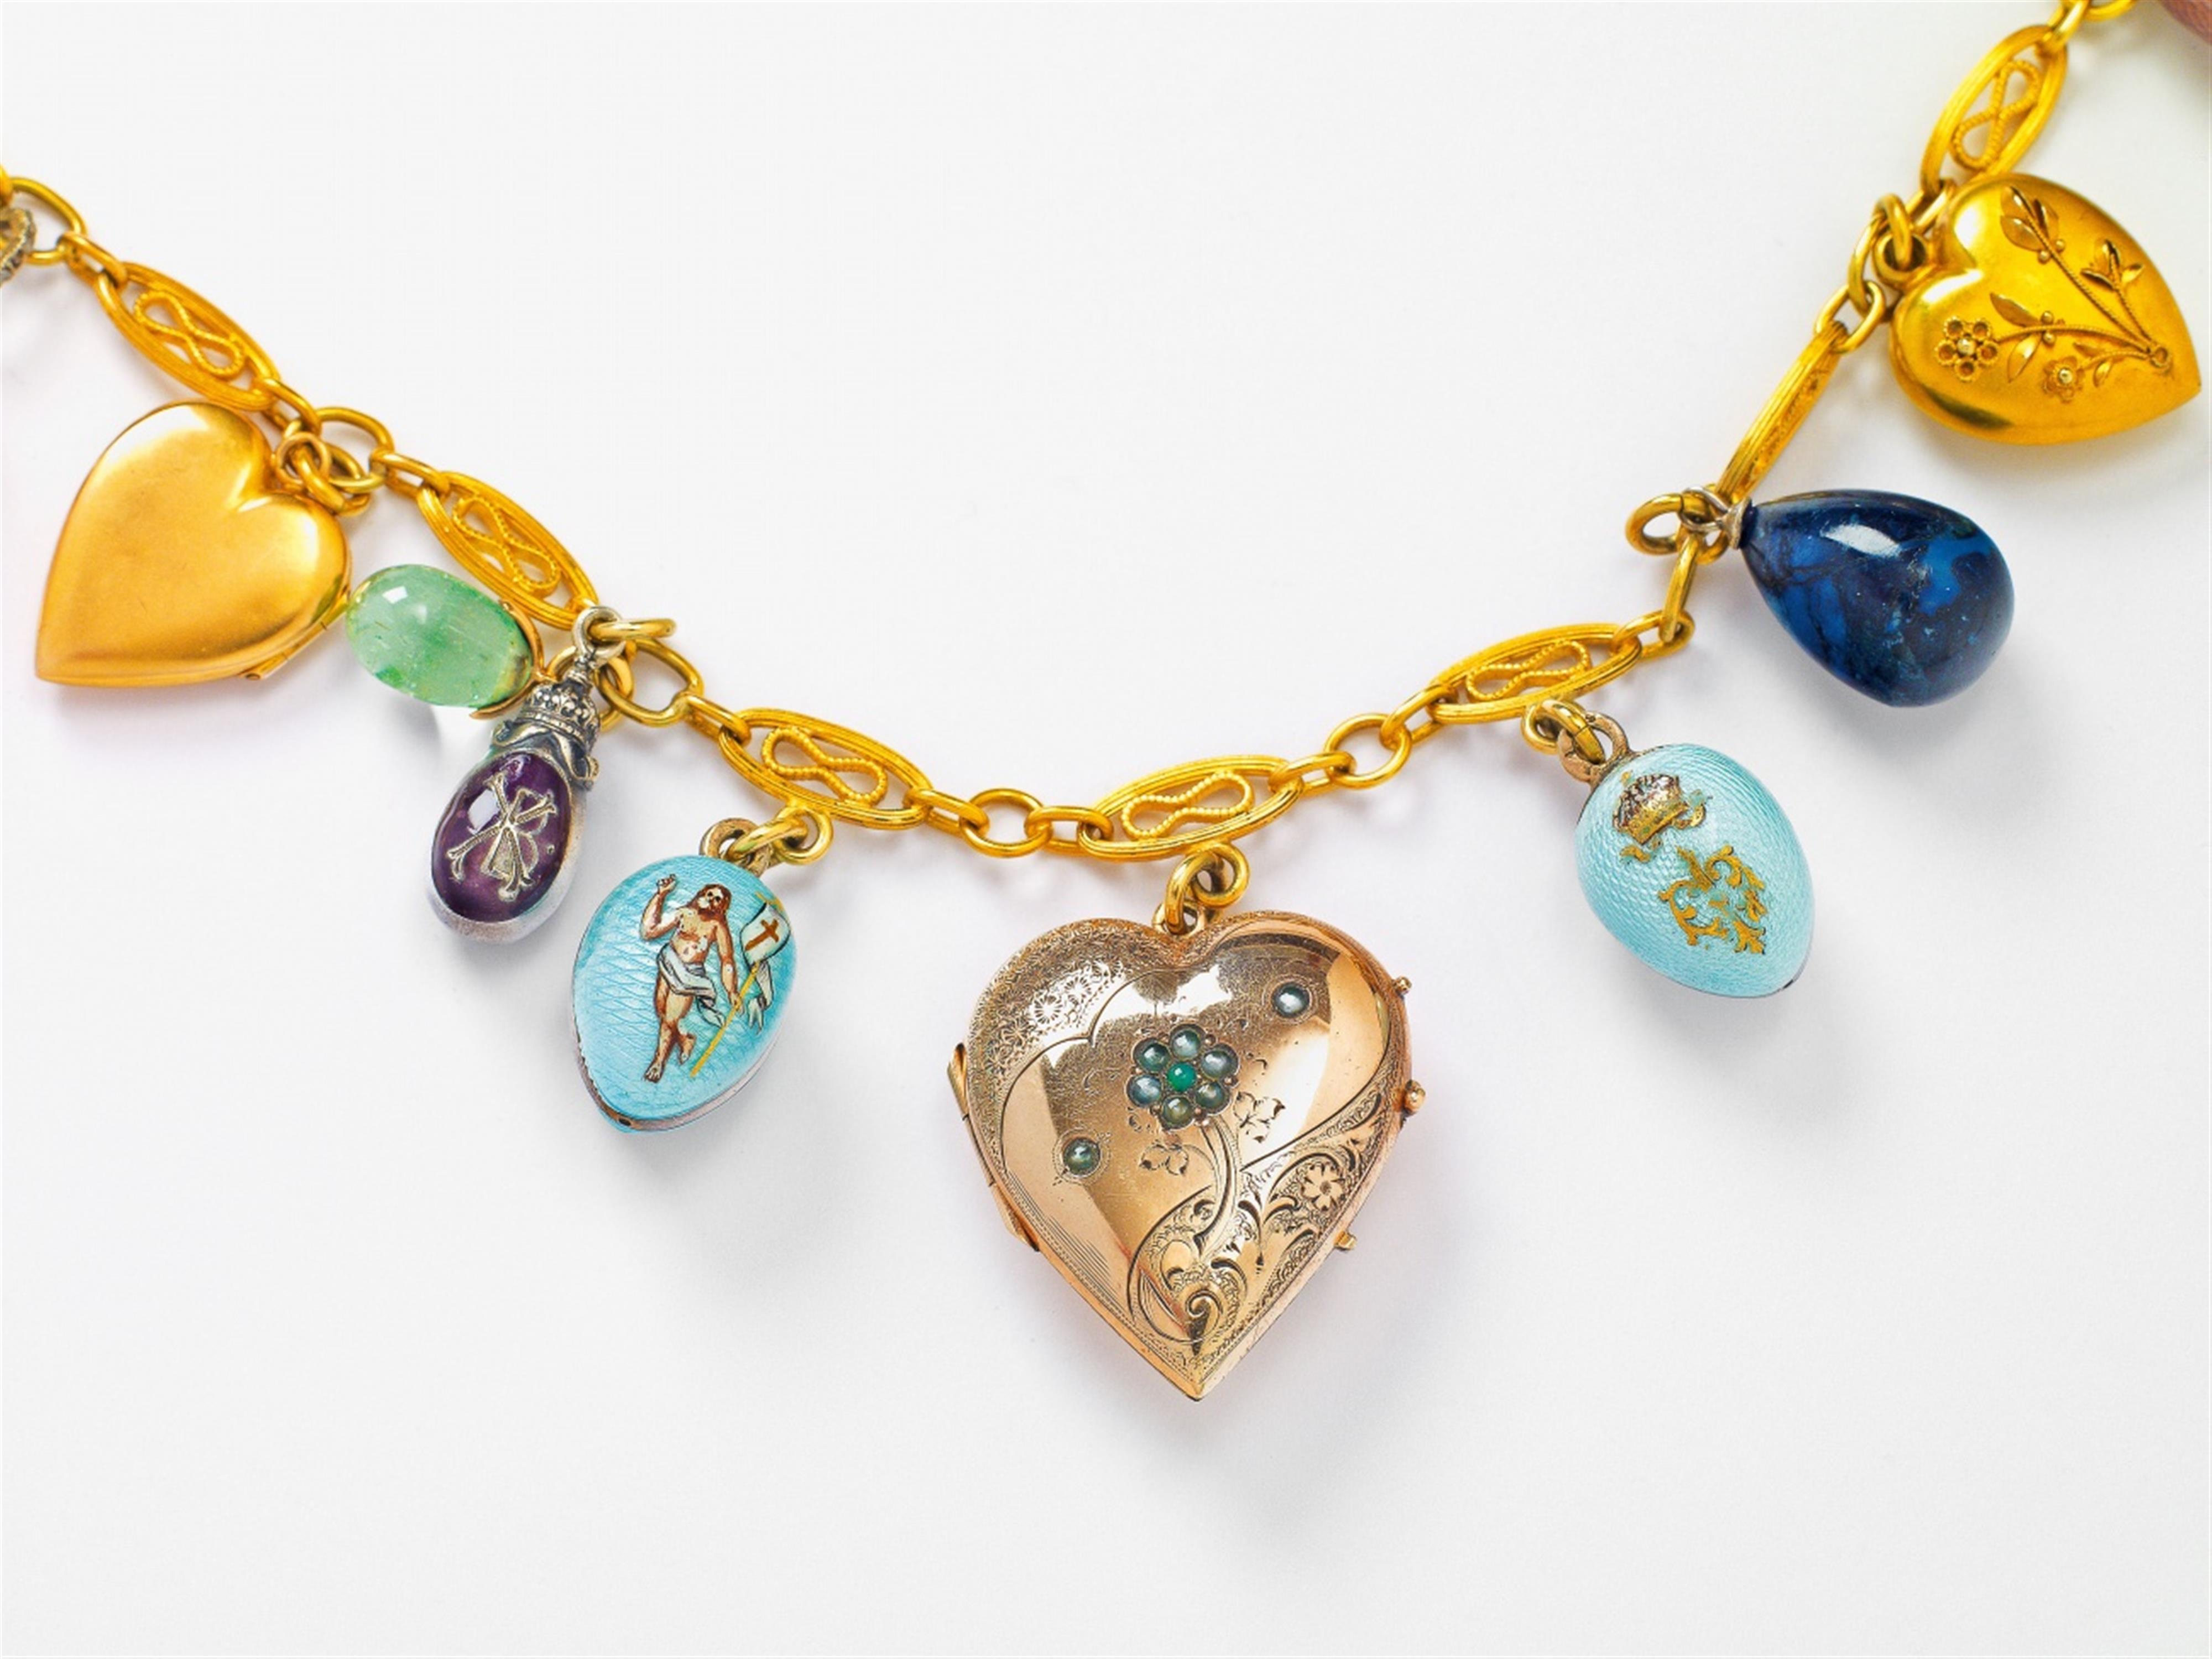 A gold, silver, enamel, gem-set charm necklace with egg- and heart-shaped pendants - image-3